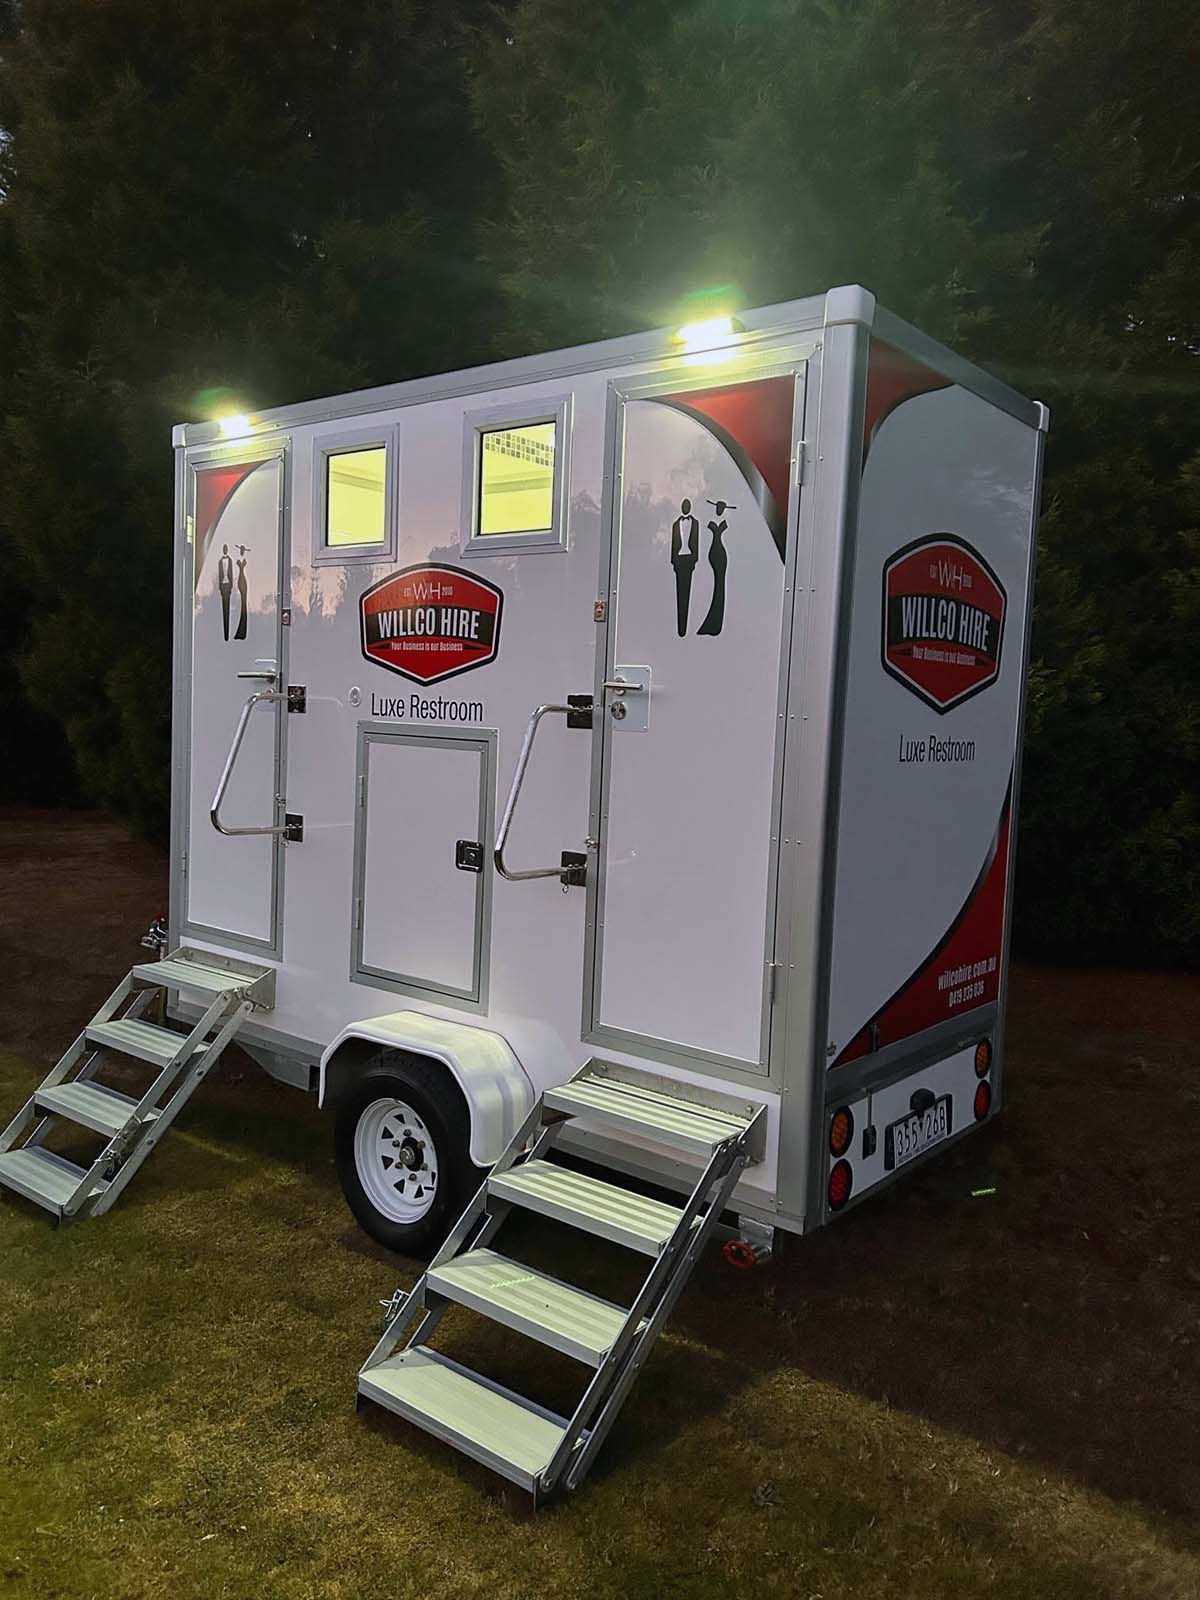 Luxury Portable Toilet Trailer - Perfect for weddings and parties